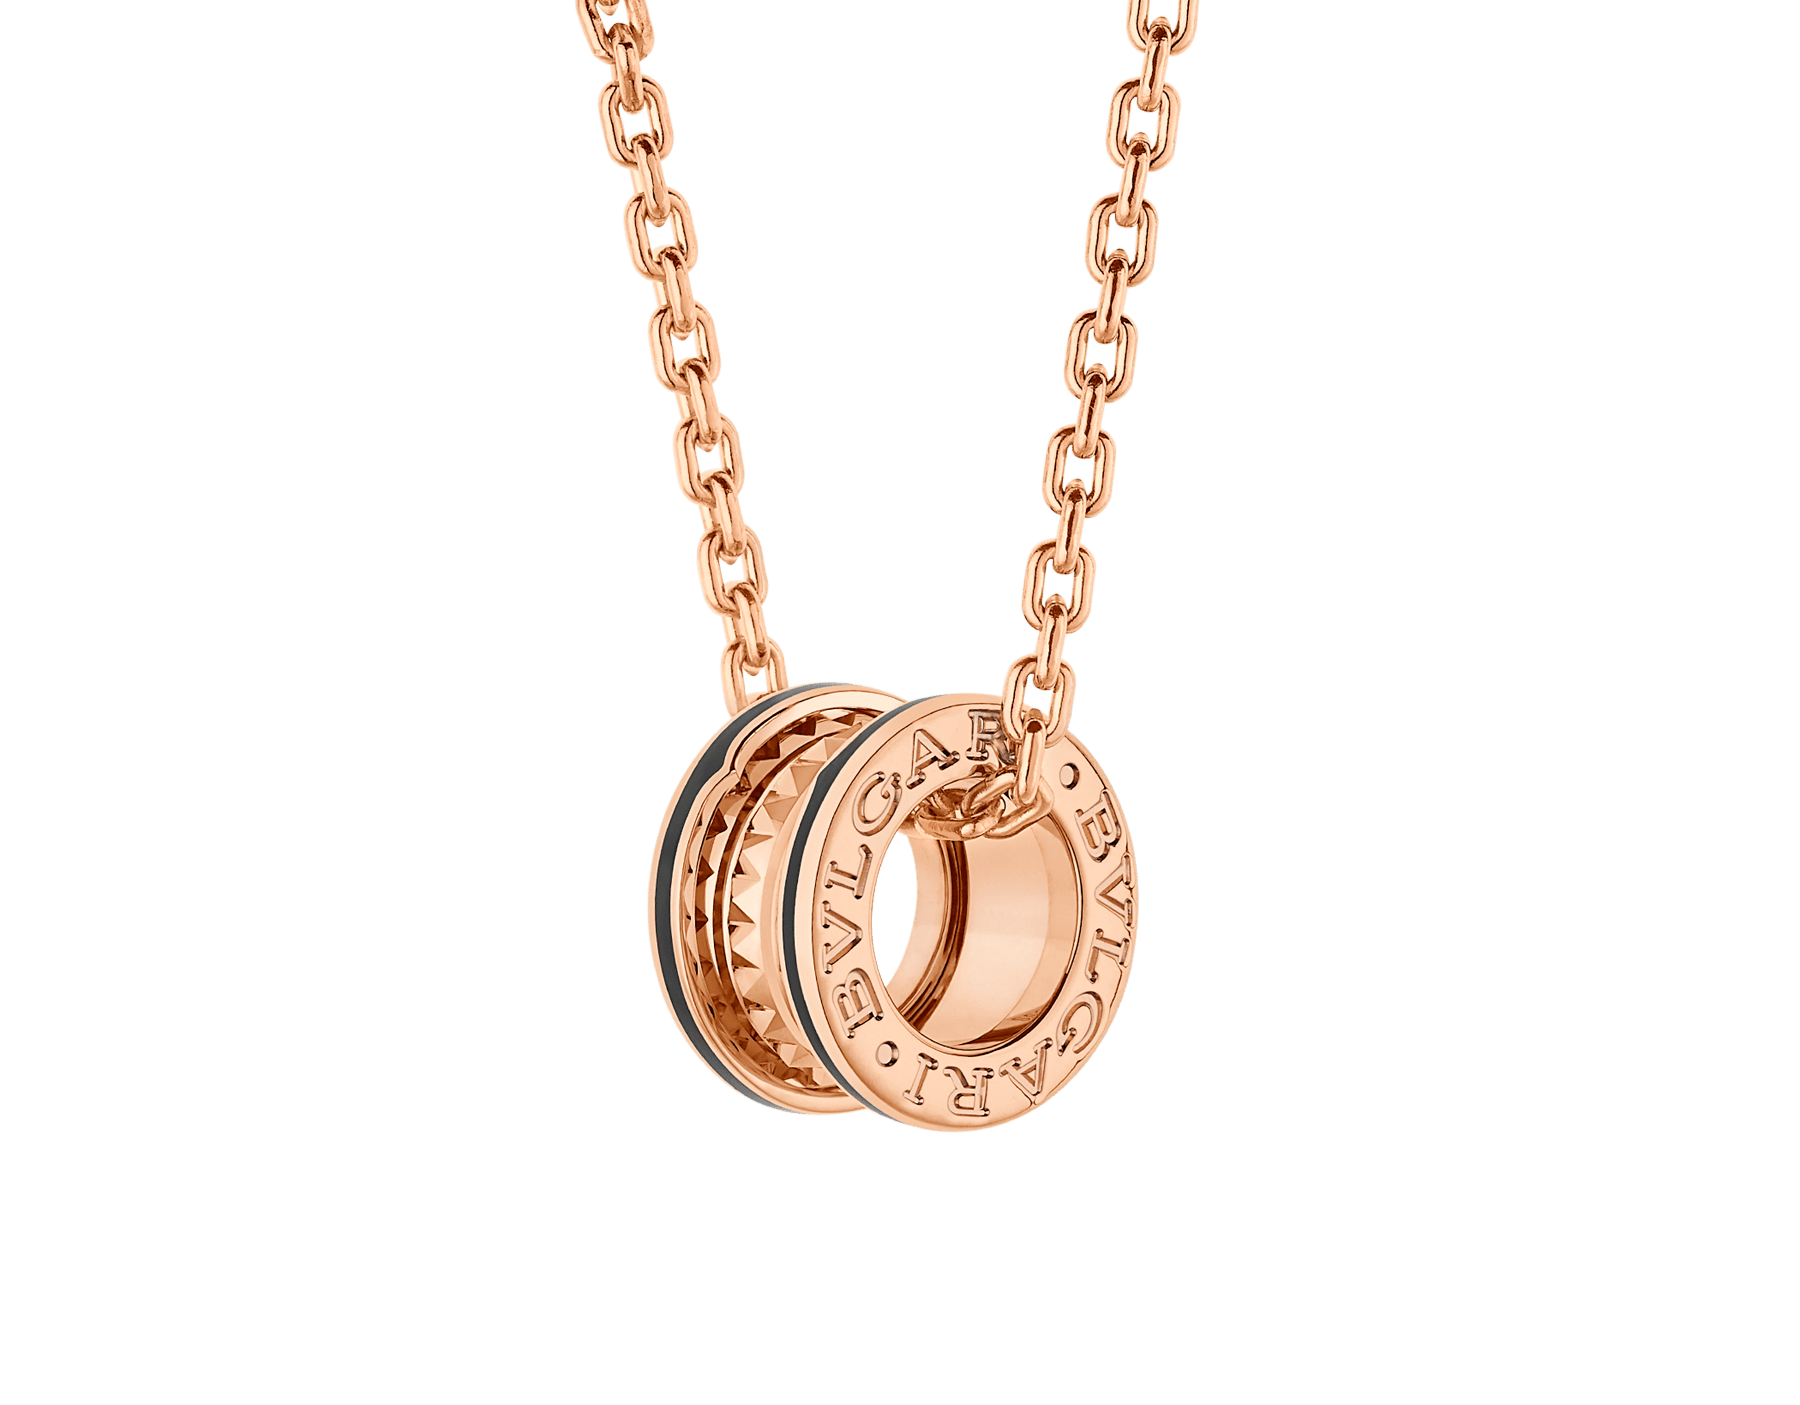 B.zero1 Rock pendant necklace in 18 kt rose gold with studs and black ceramic inserts 358350 image 1